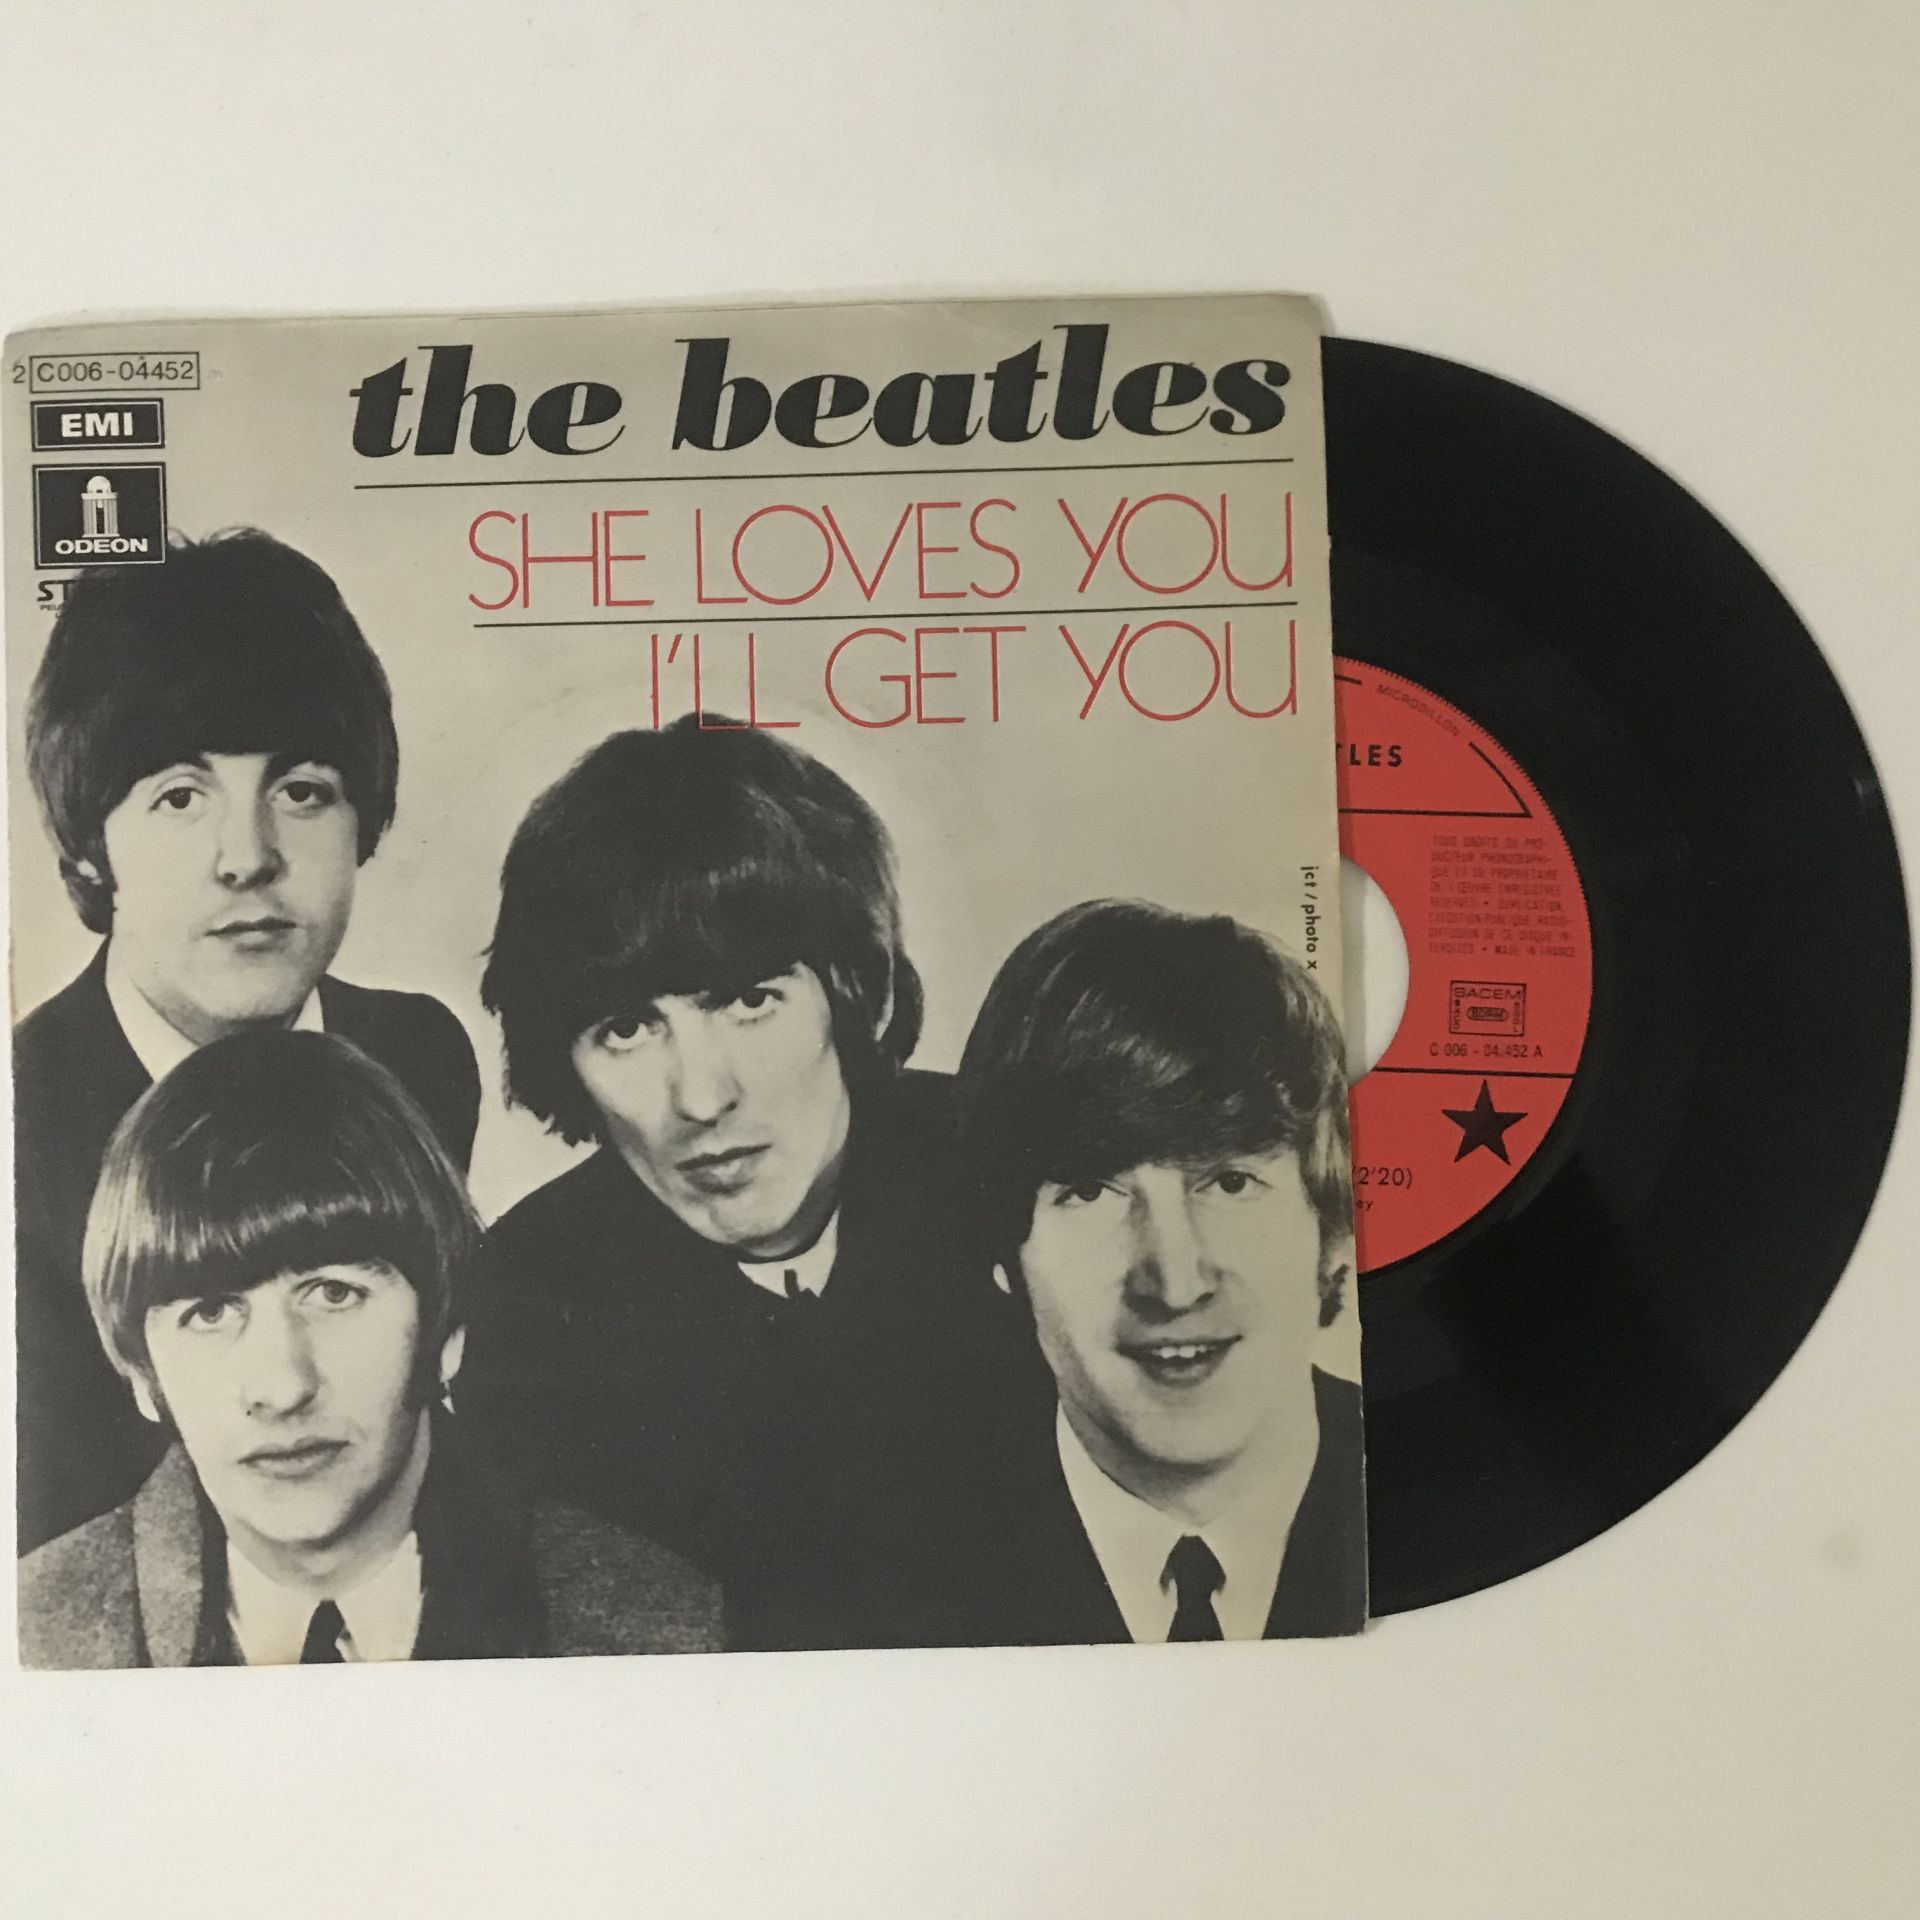 The Beatles – She Loves You / I'll Get You